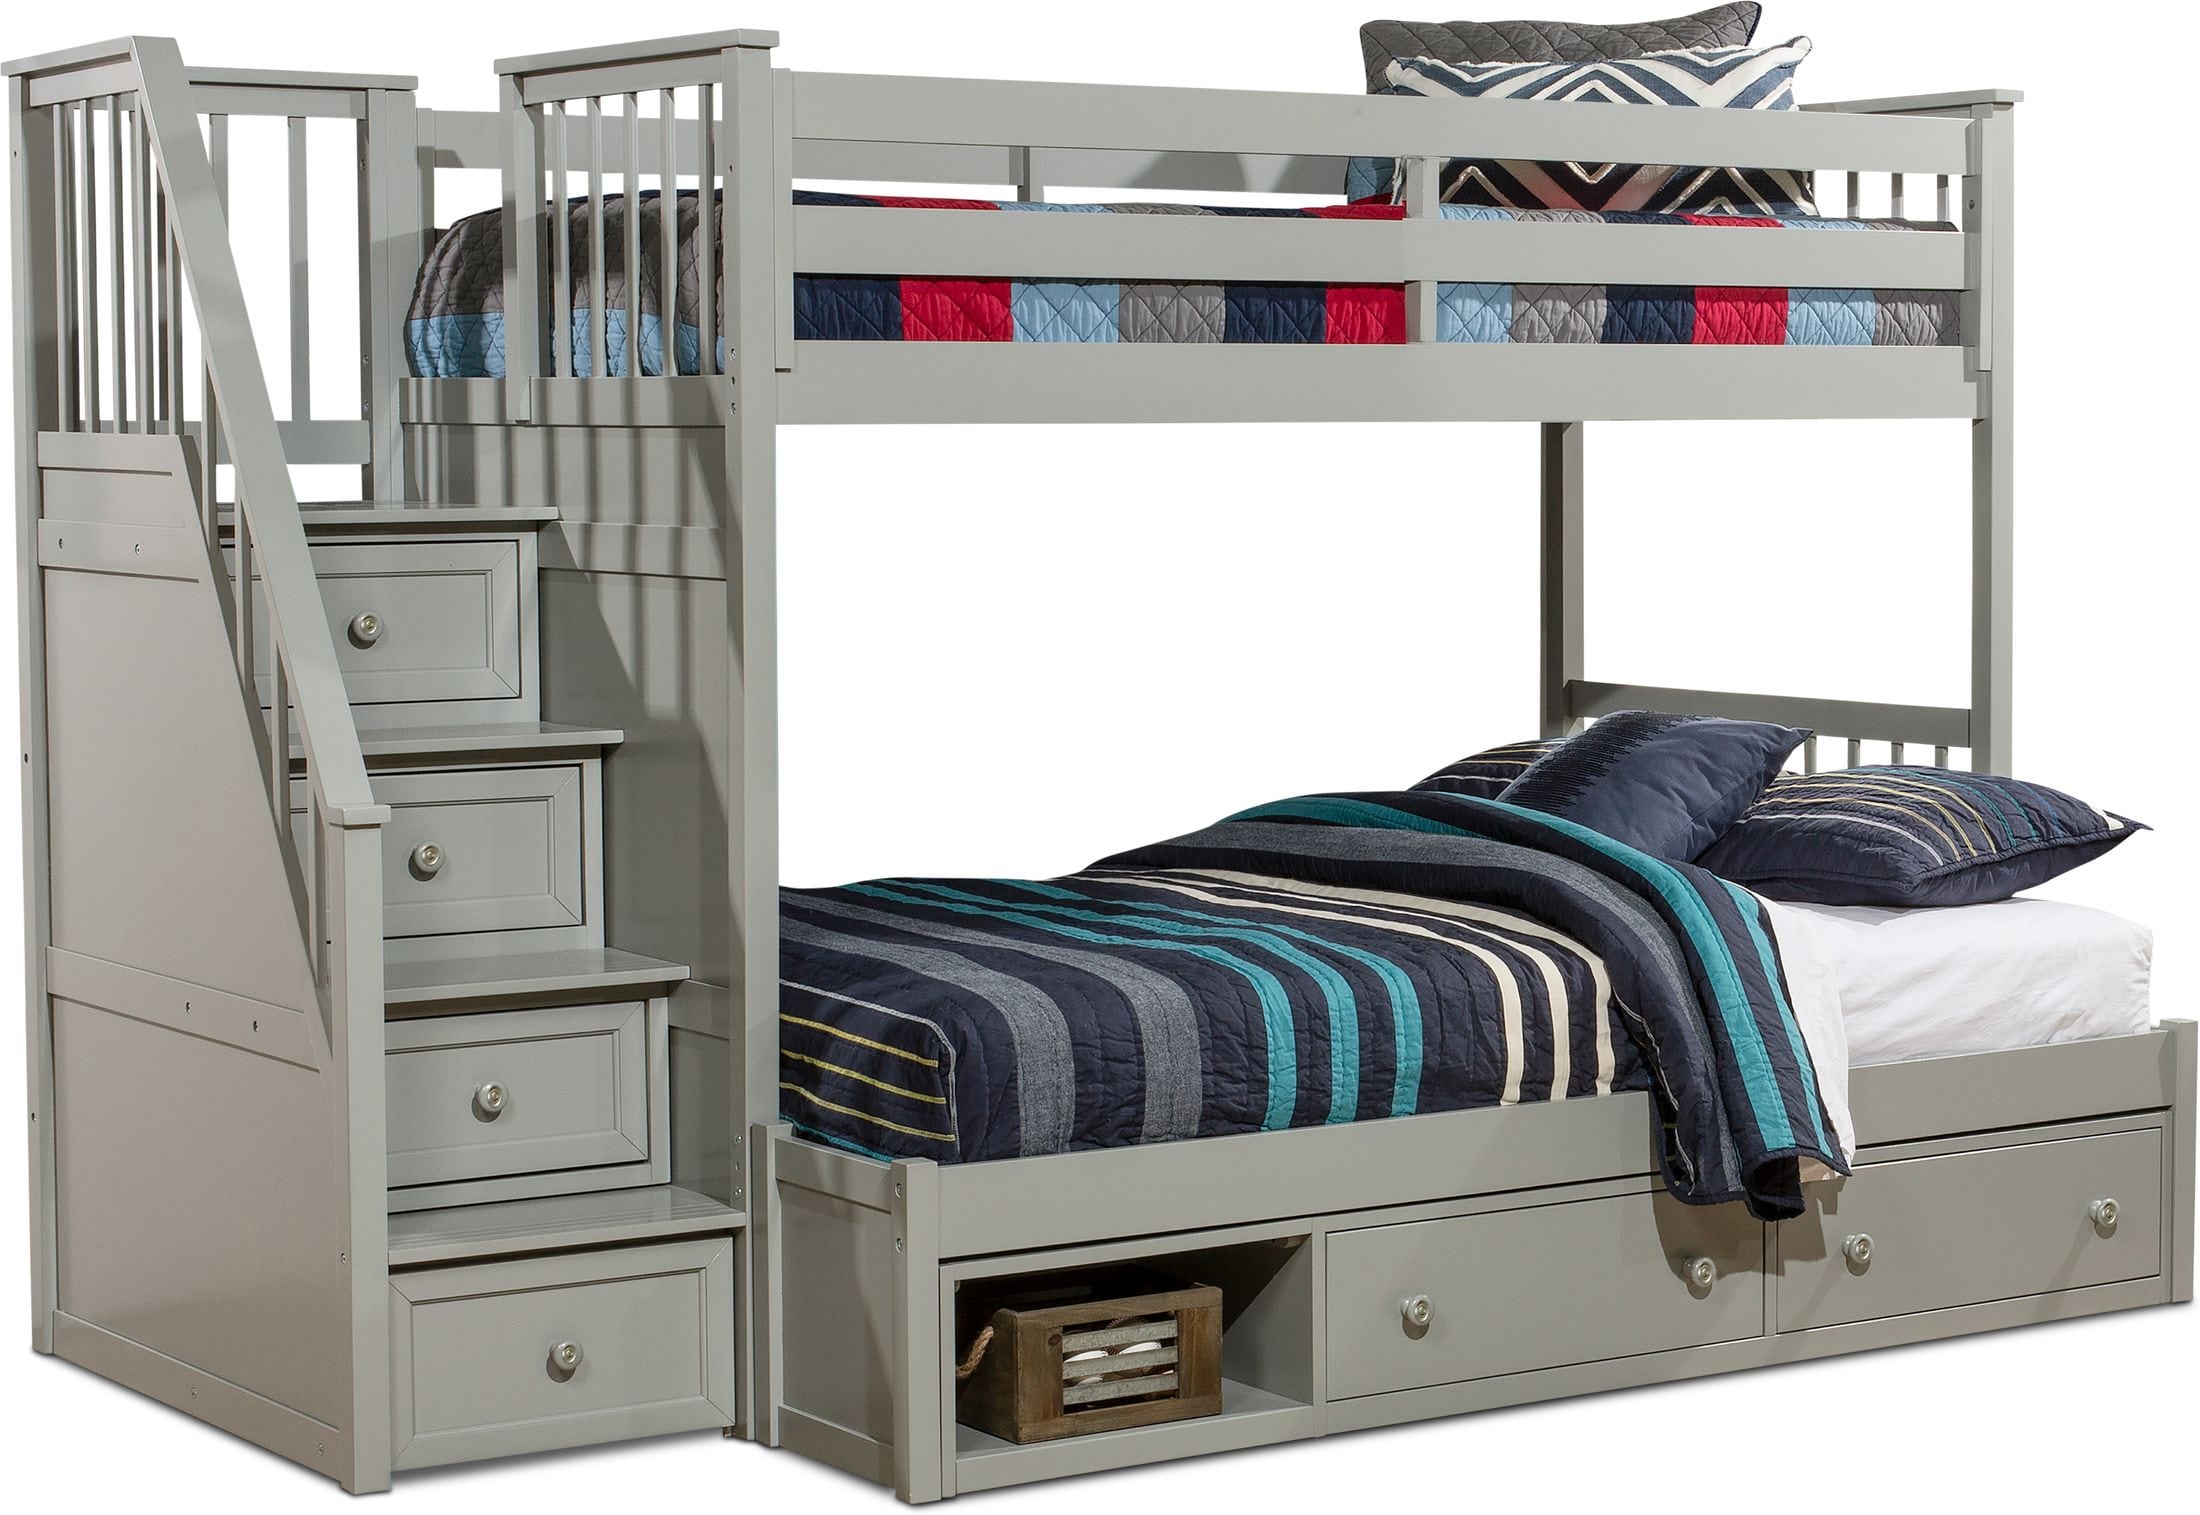 Undefined American Signature Furniture, Stairway Twin Bunk Beds With Storage